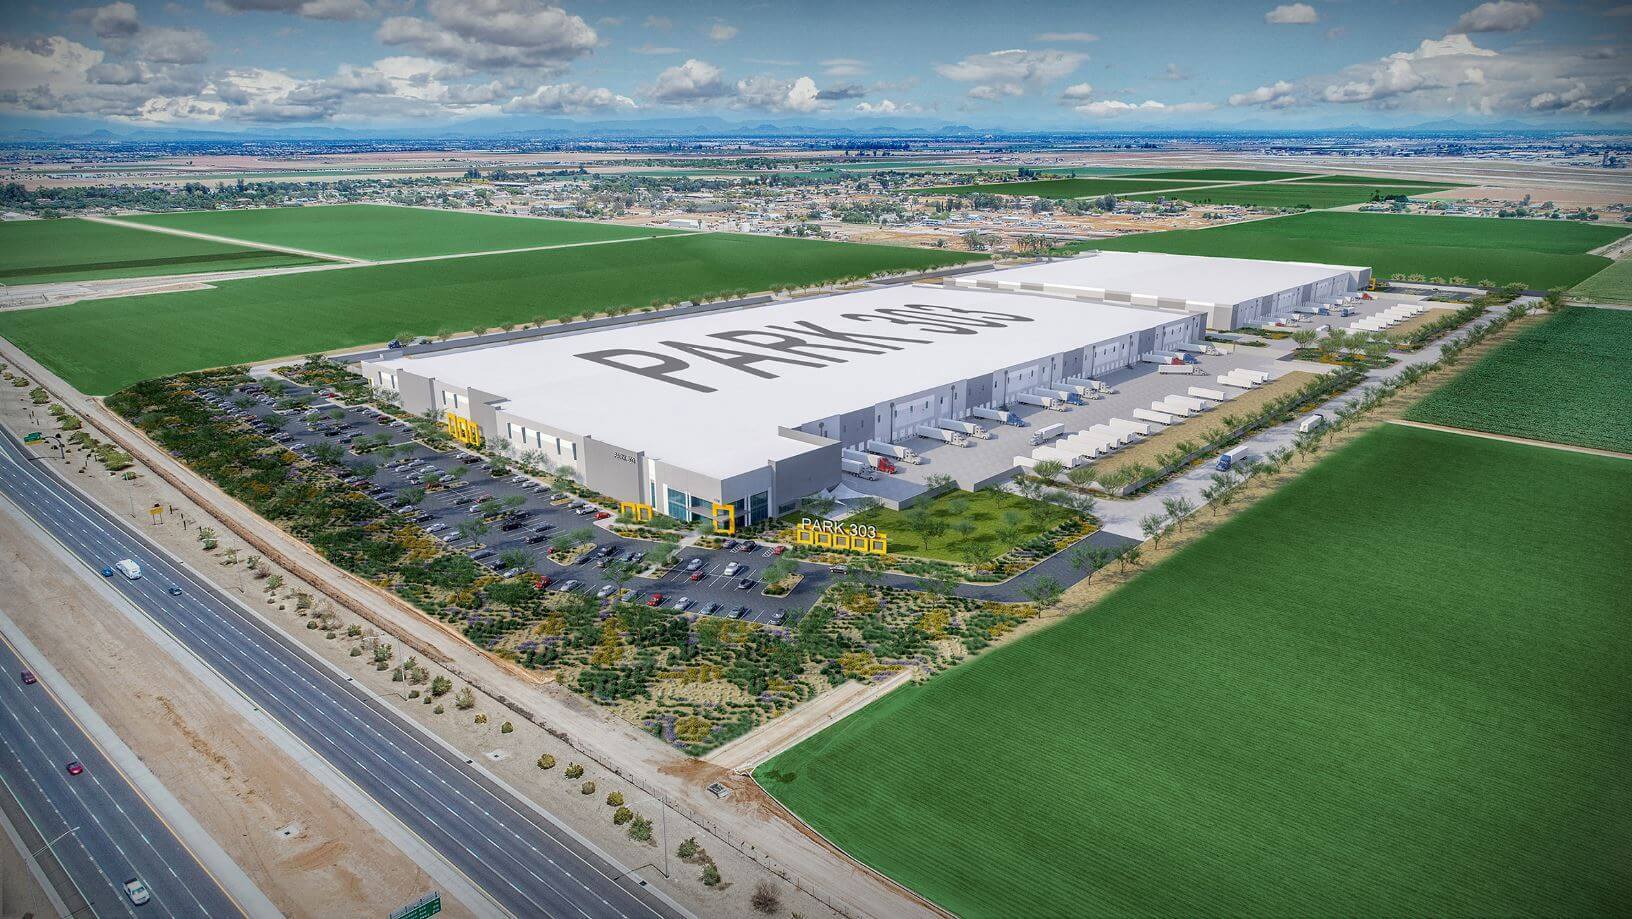 An artist's rendering of a large warehouse in California, showcasing the continued growth along the Loop 303.